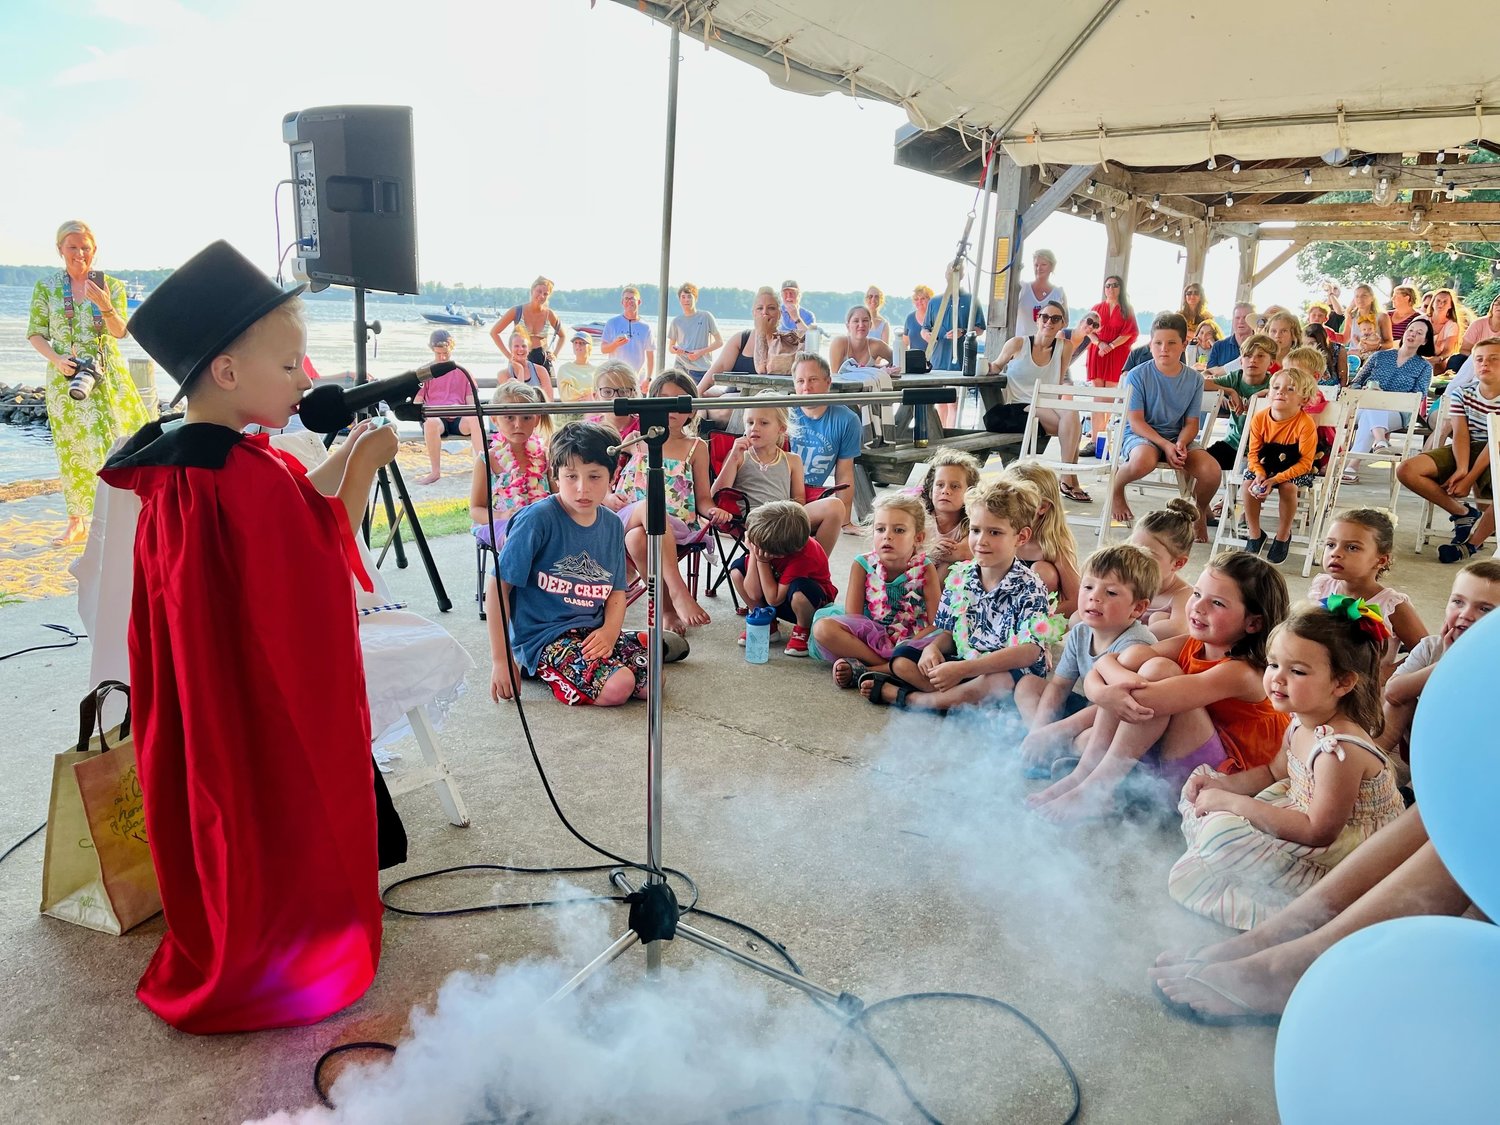 Three-year-old Owen King mesmerized the audience with his wizardry and magic tricks.